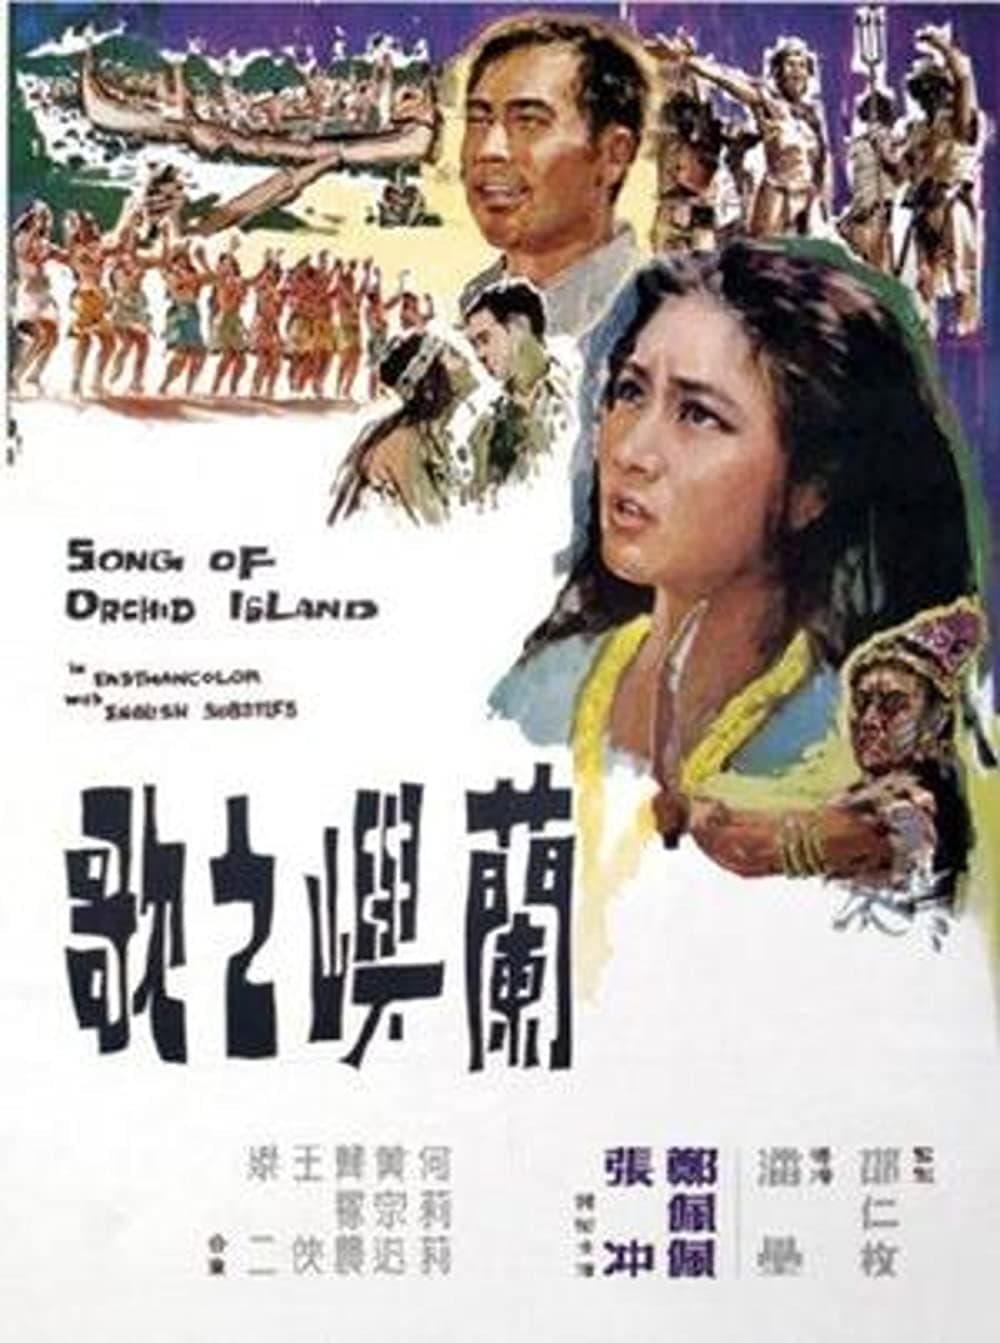 Song of Orchid Island